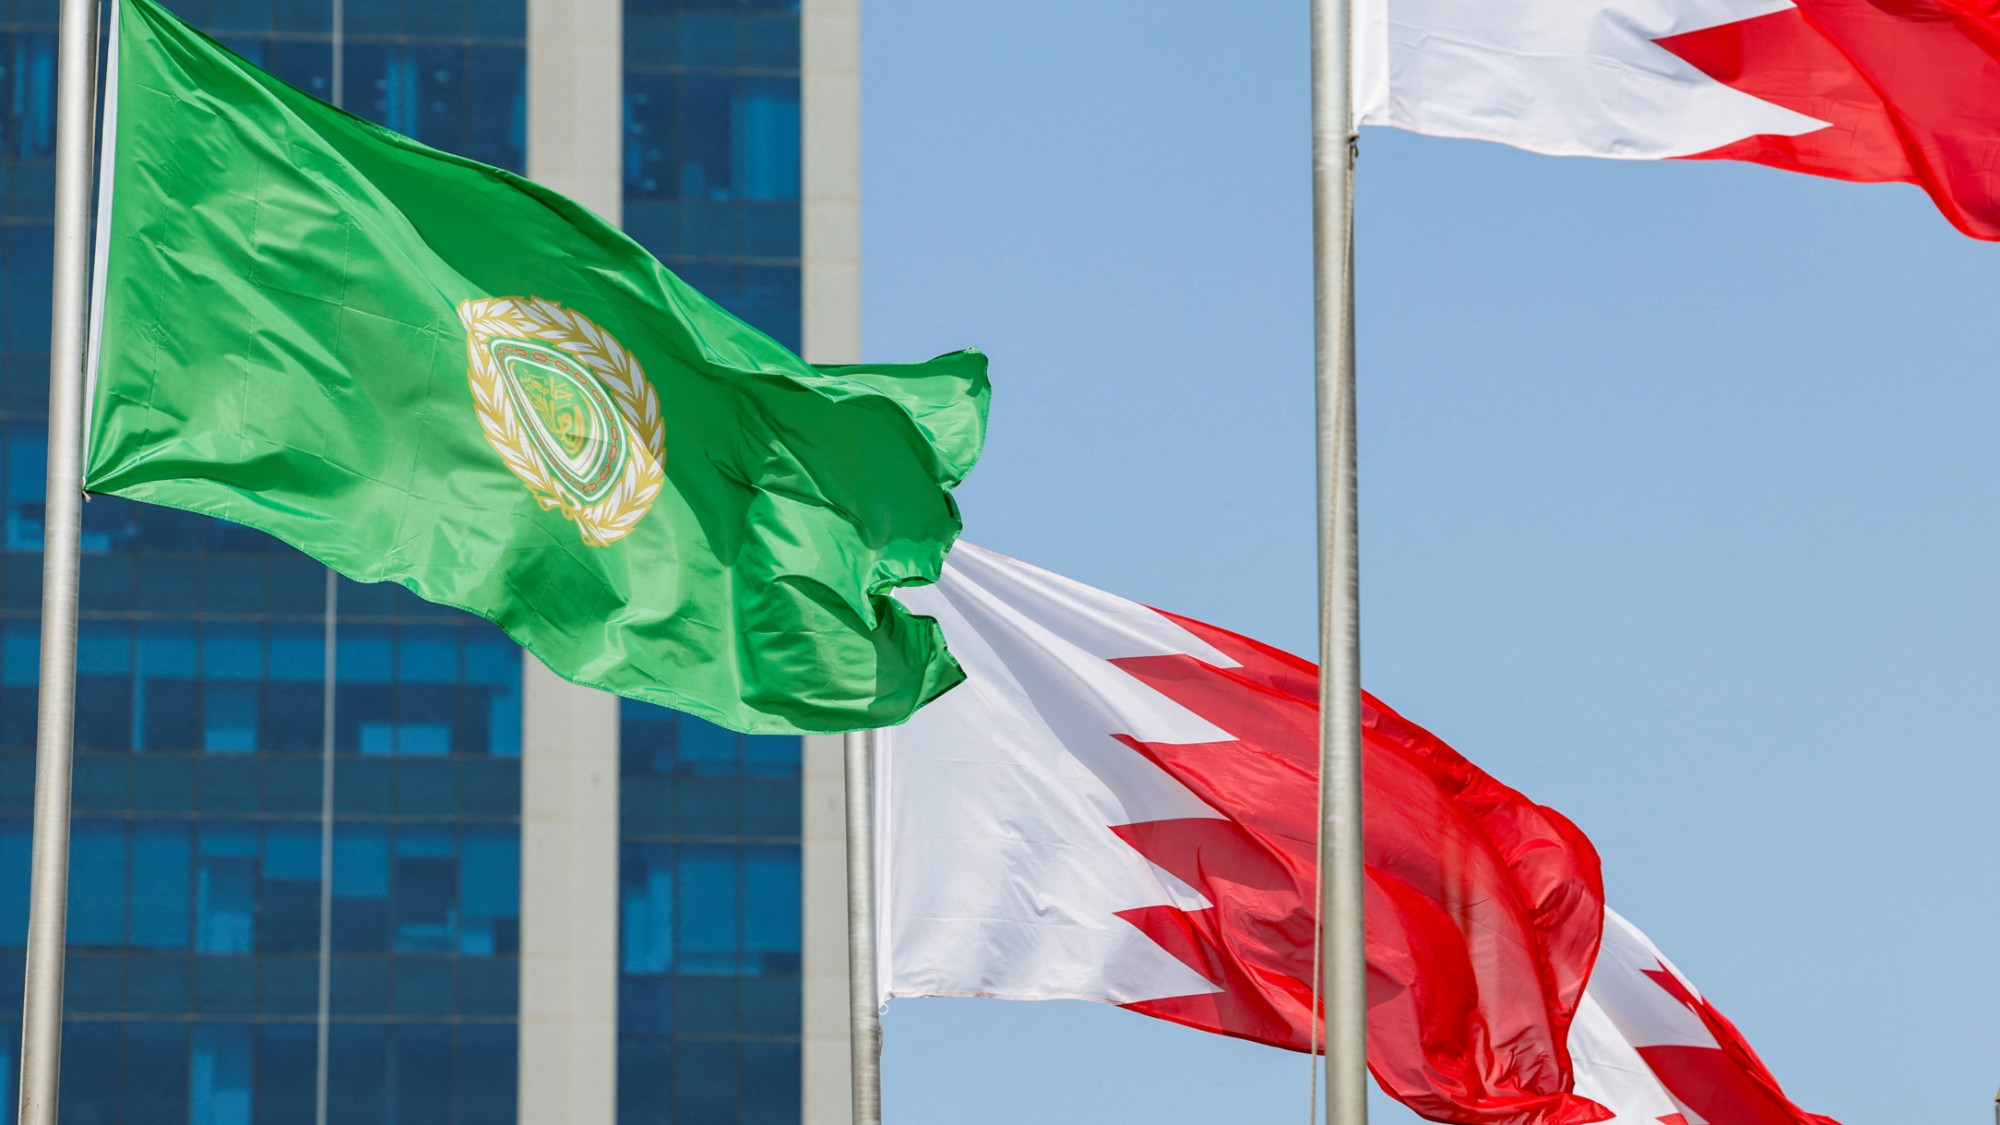 Bahraini flags and a flag with the logo of the 33rd Arab Summit are displayed ahead of the summit, which will take place in Manama, Bahrain, 14 May 2024 (Reuters/Hamad I Mohammed)